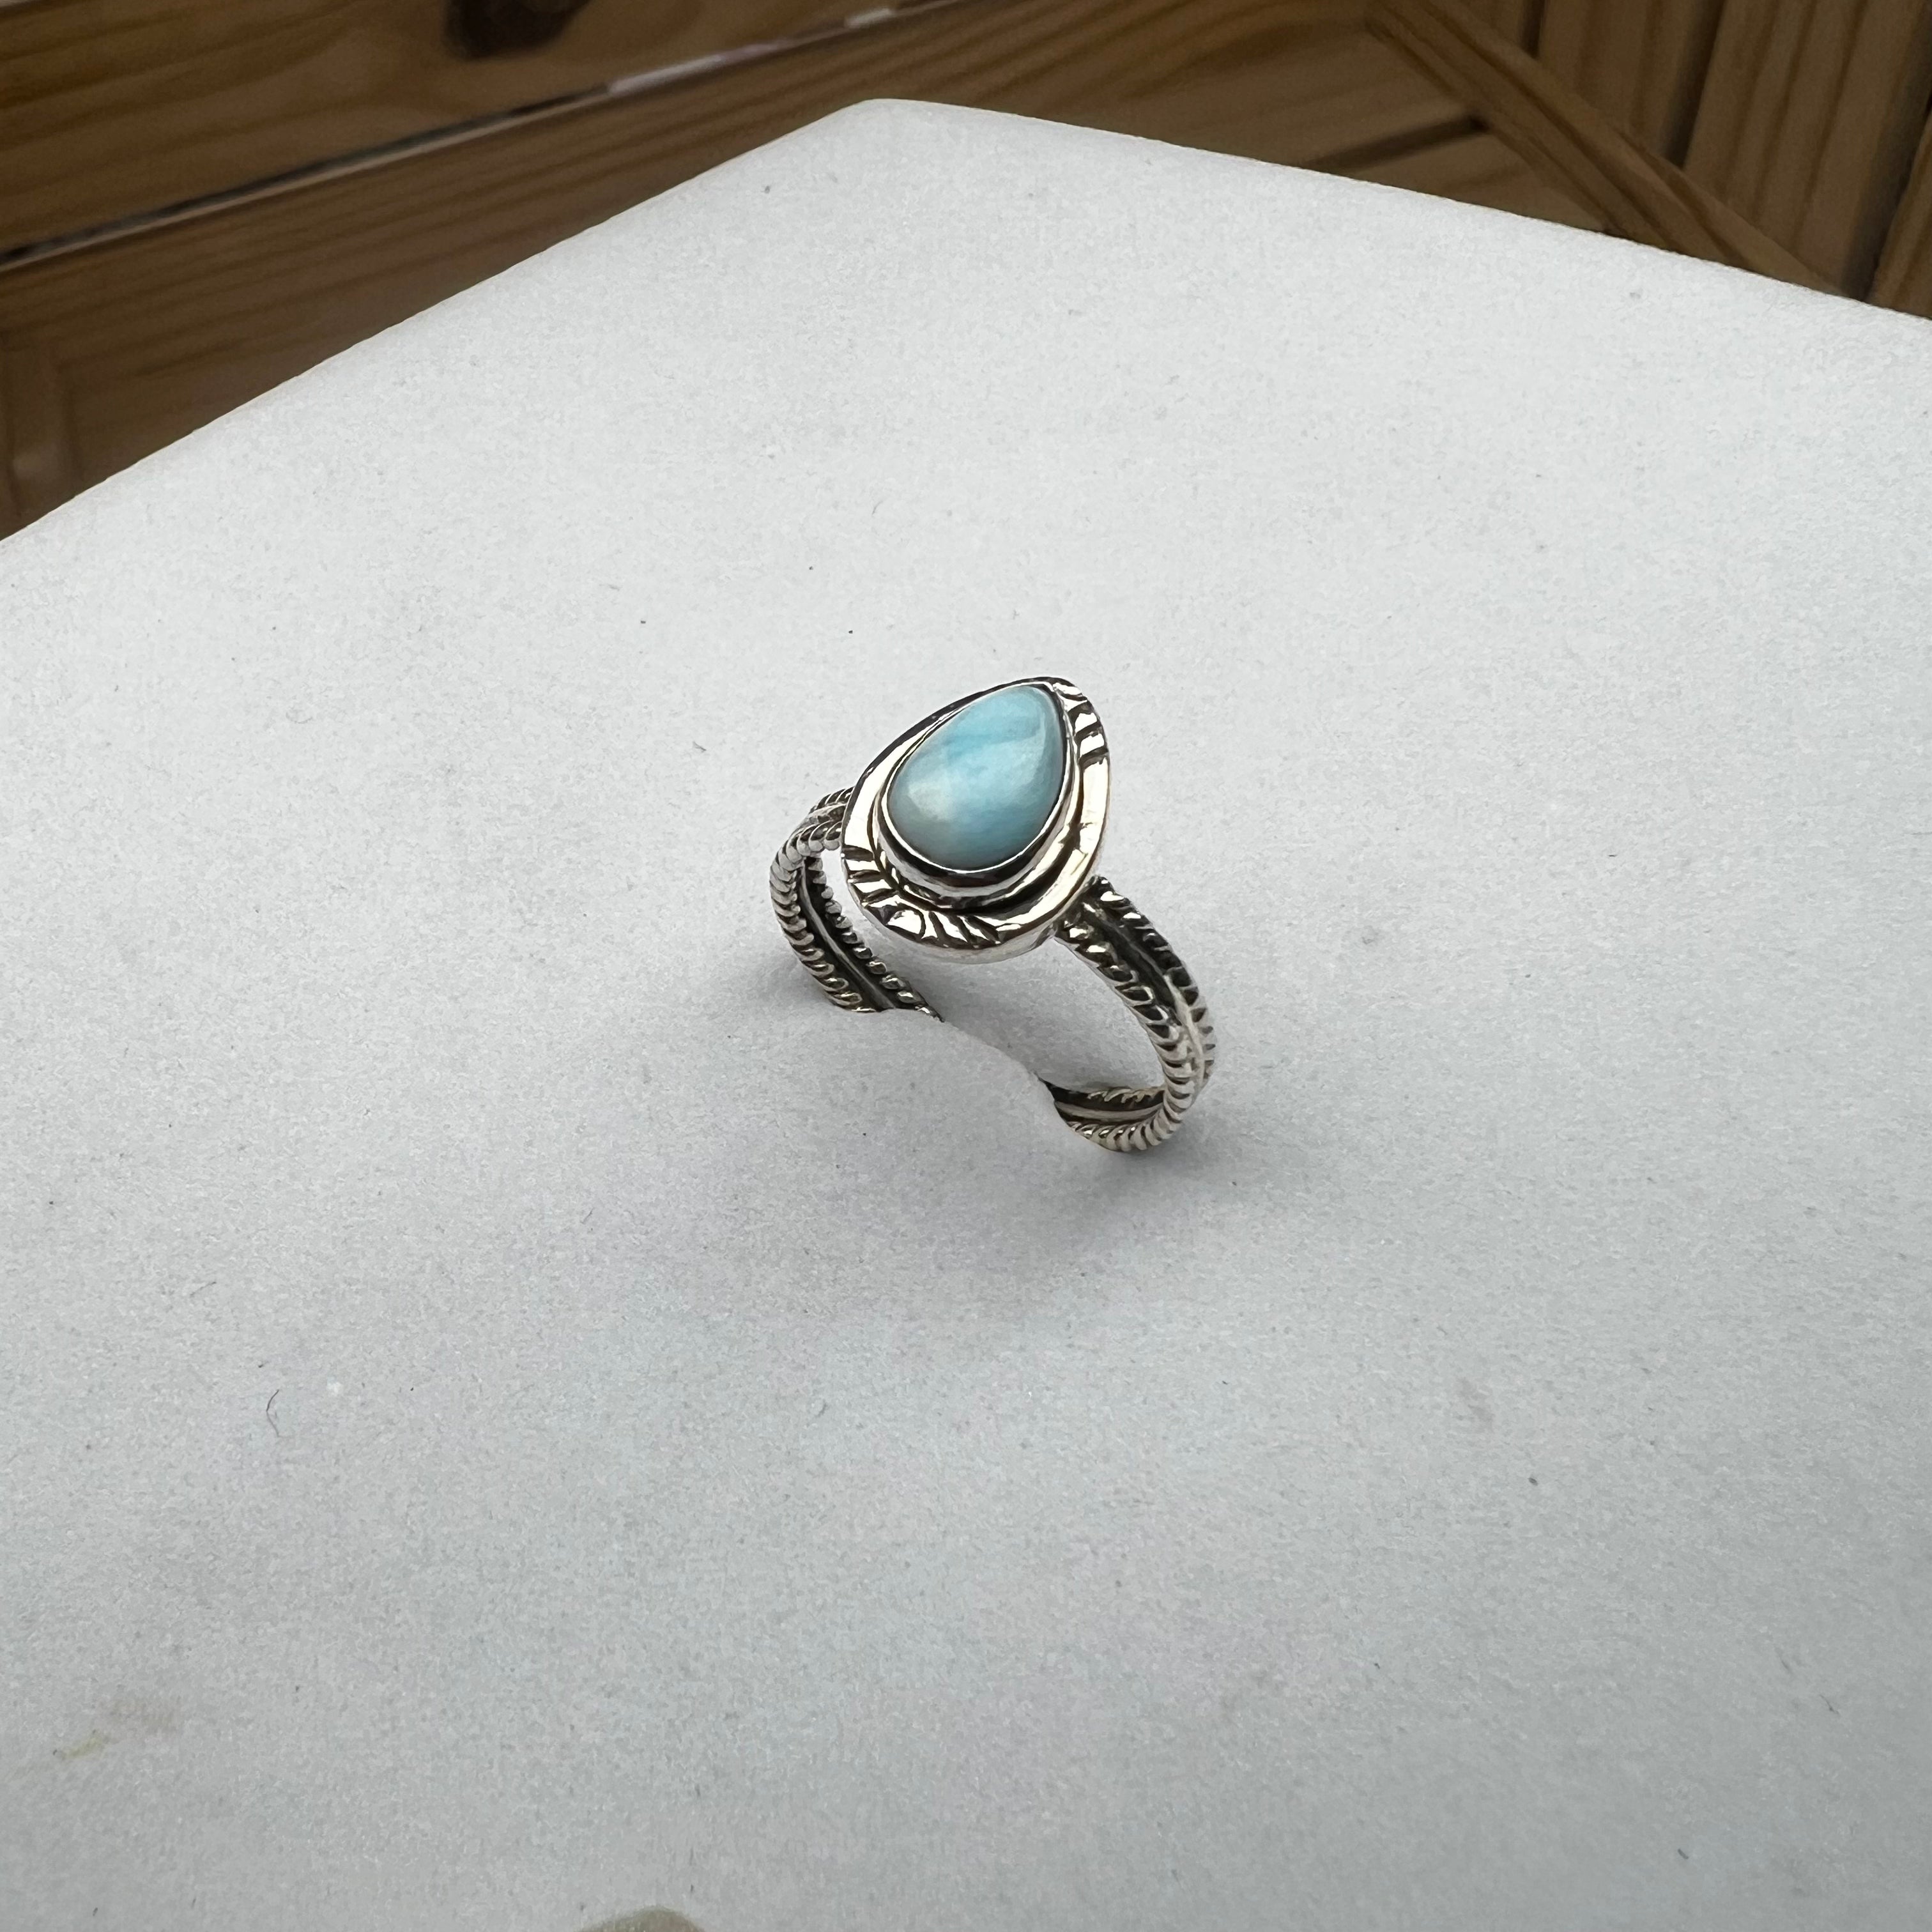 HANDCRAFTED LARIMAR RING IN
SILVER 925 (SIZE 7)